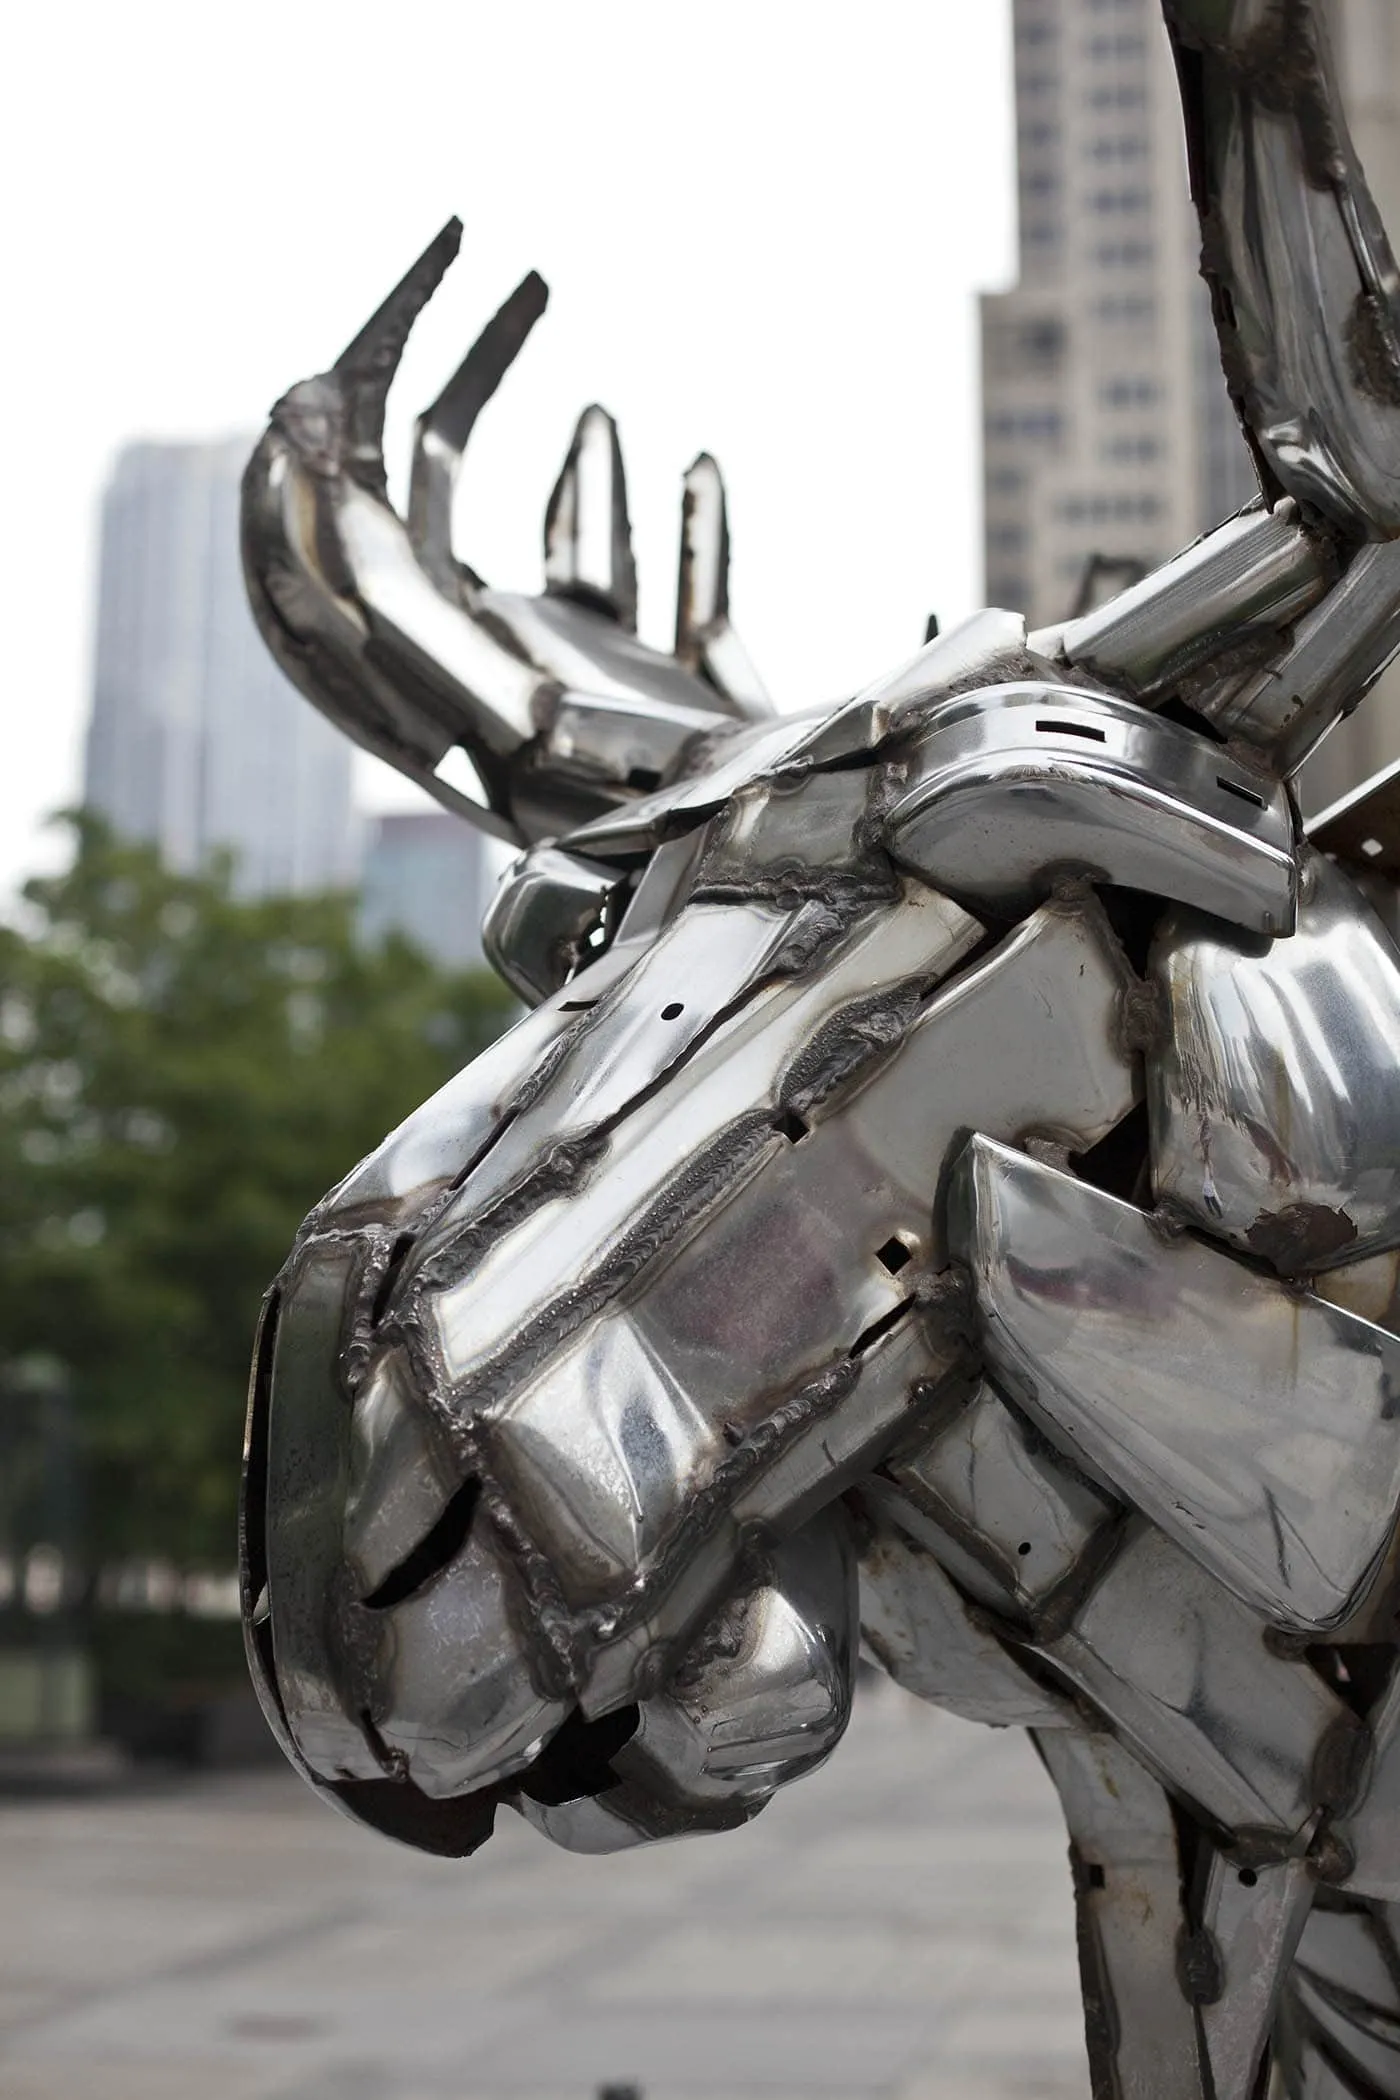 Moose (W-02-03), a chrome moose statue on Michigan Ave. in Chicago, Illinois.